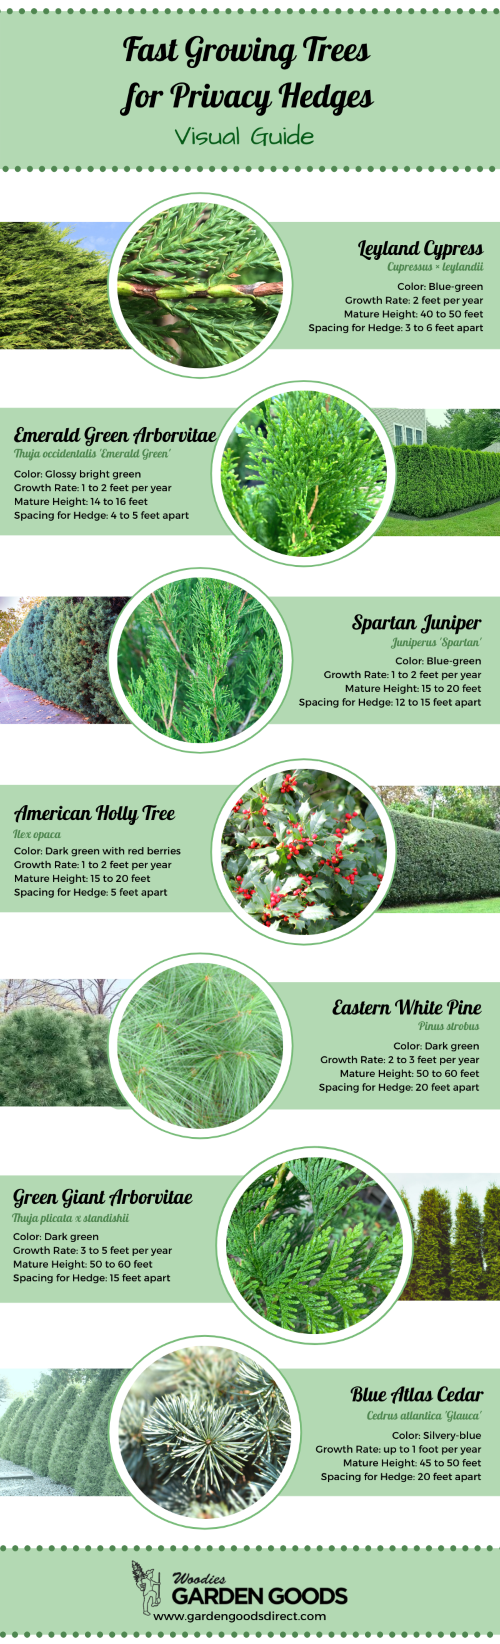 visual guide of fast growing trees for a privacy hedge